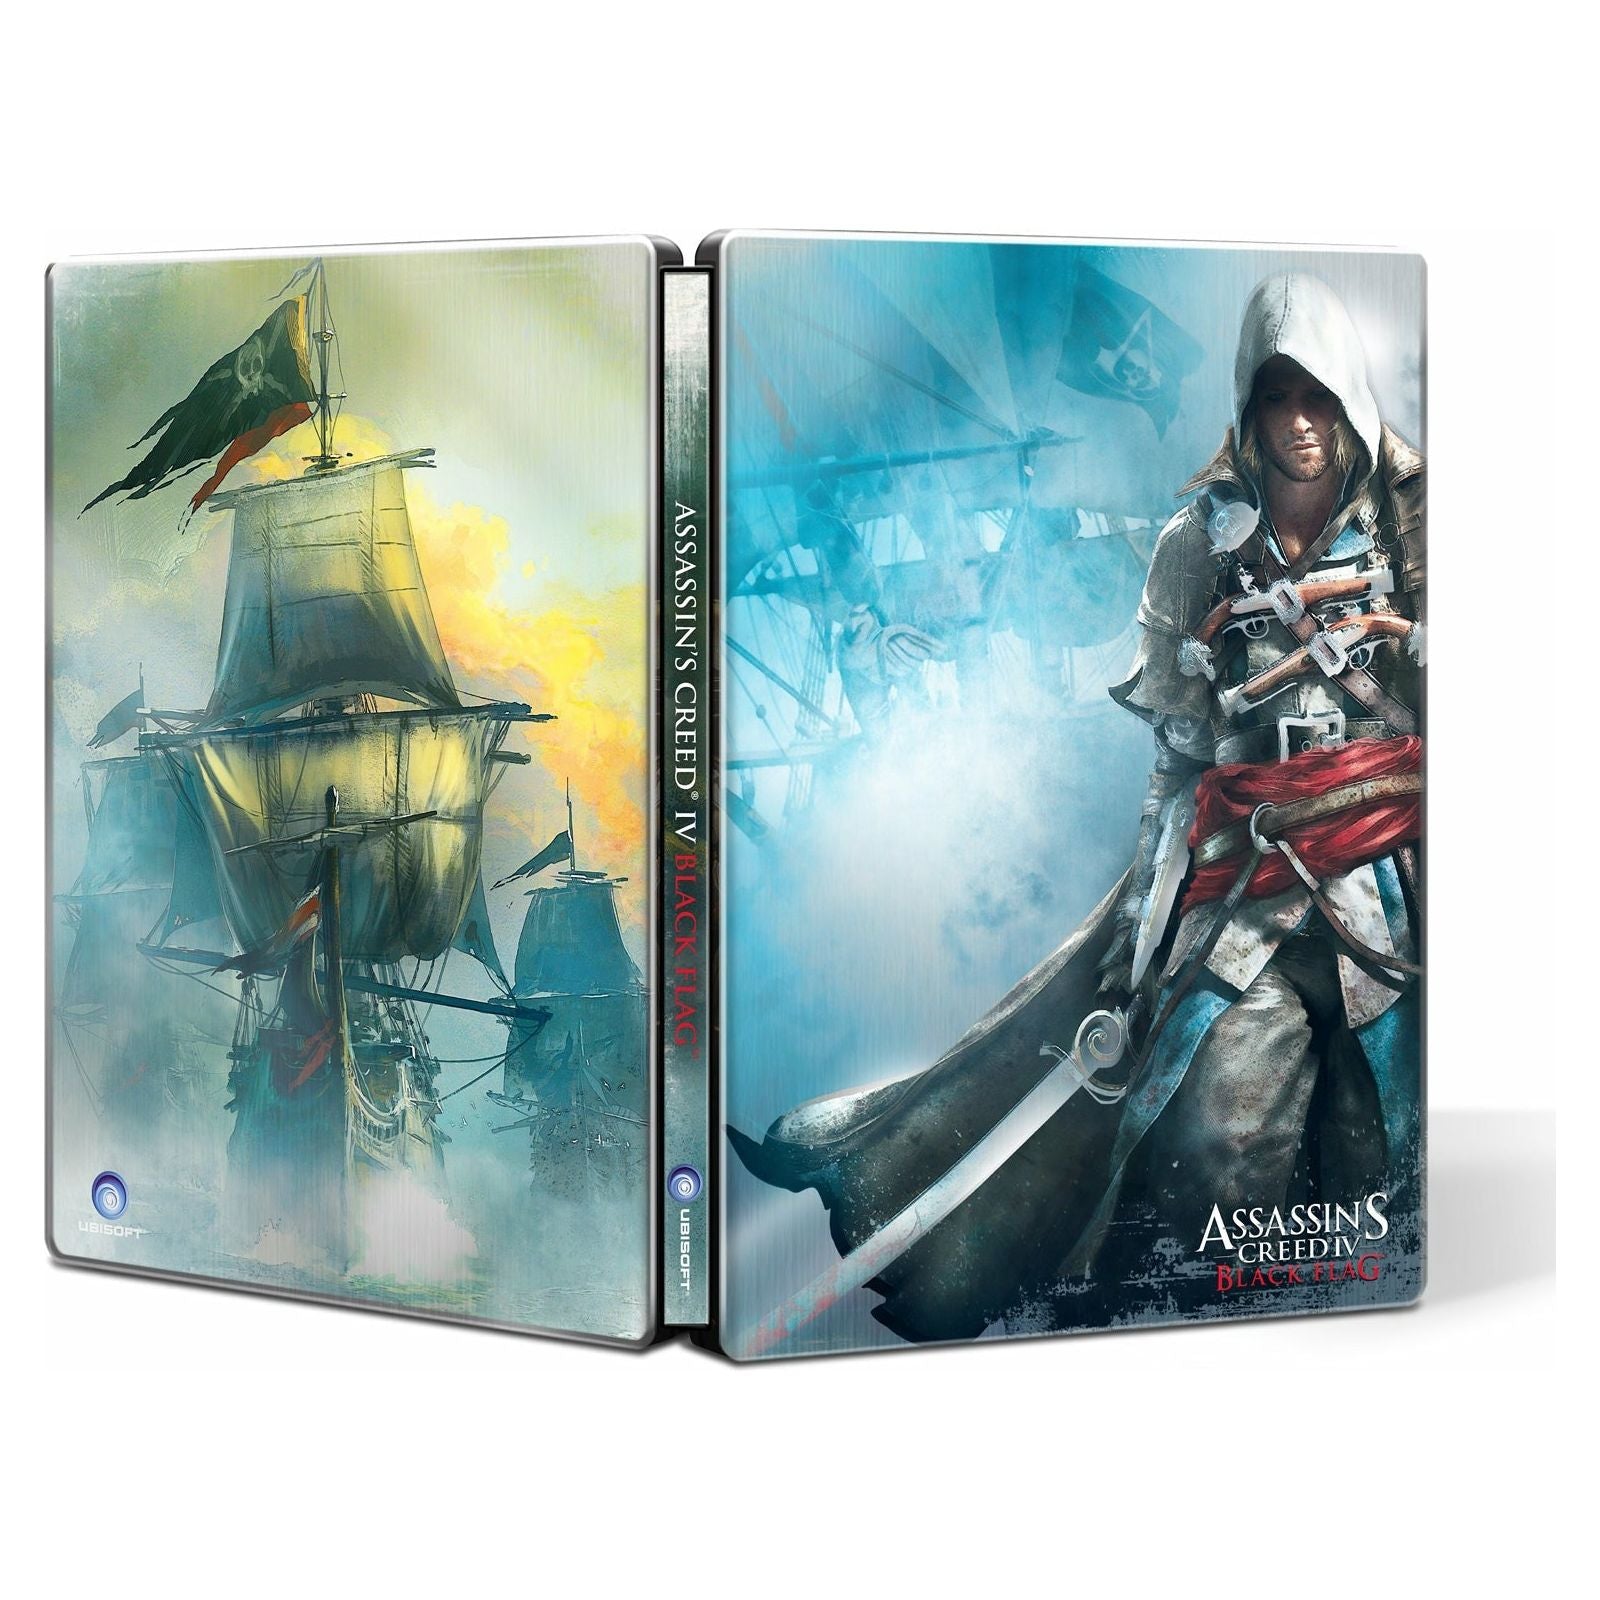 PS3 - Assassin's Creed IV Black Flag Collector's Edition (Steelcase With Soundtrack)